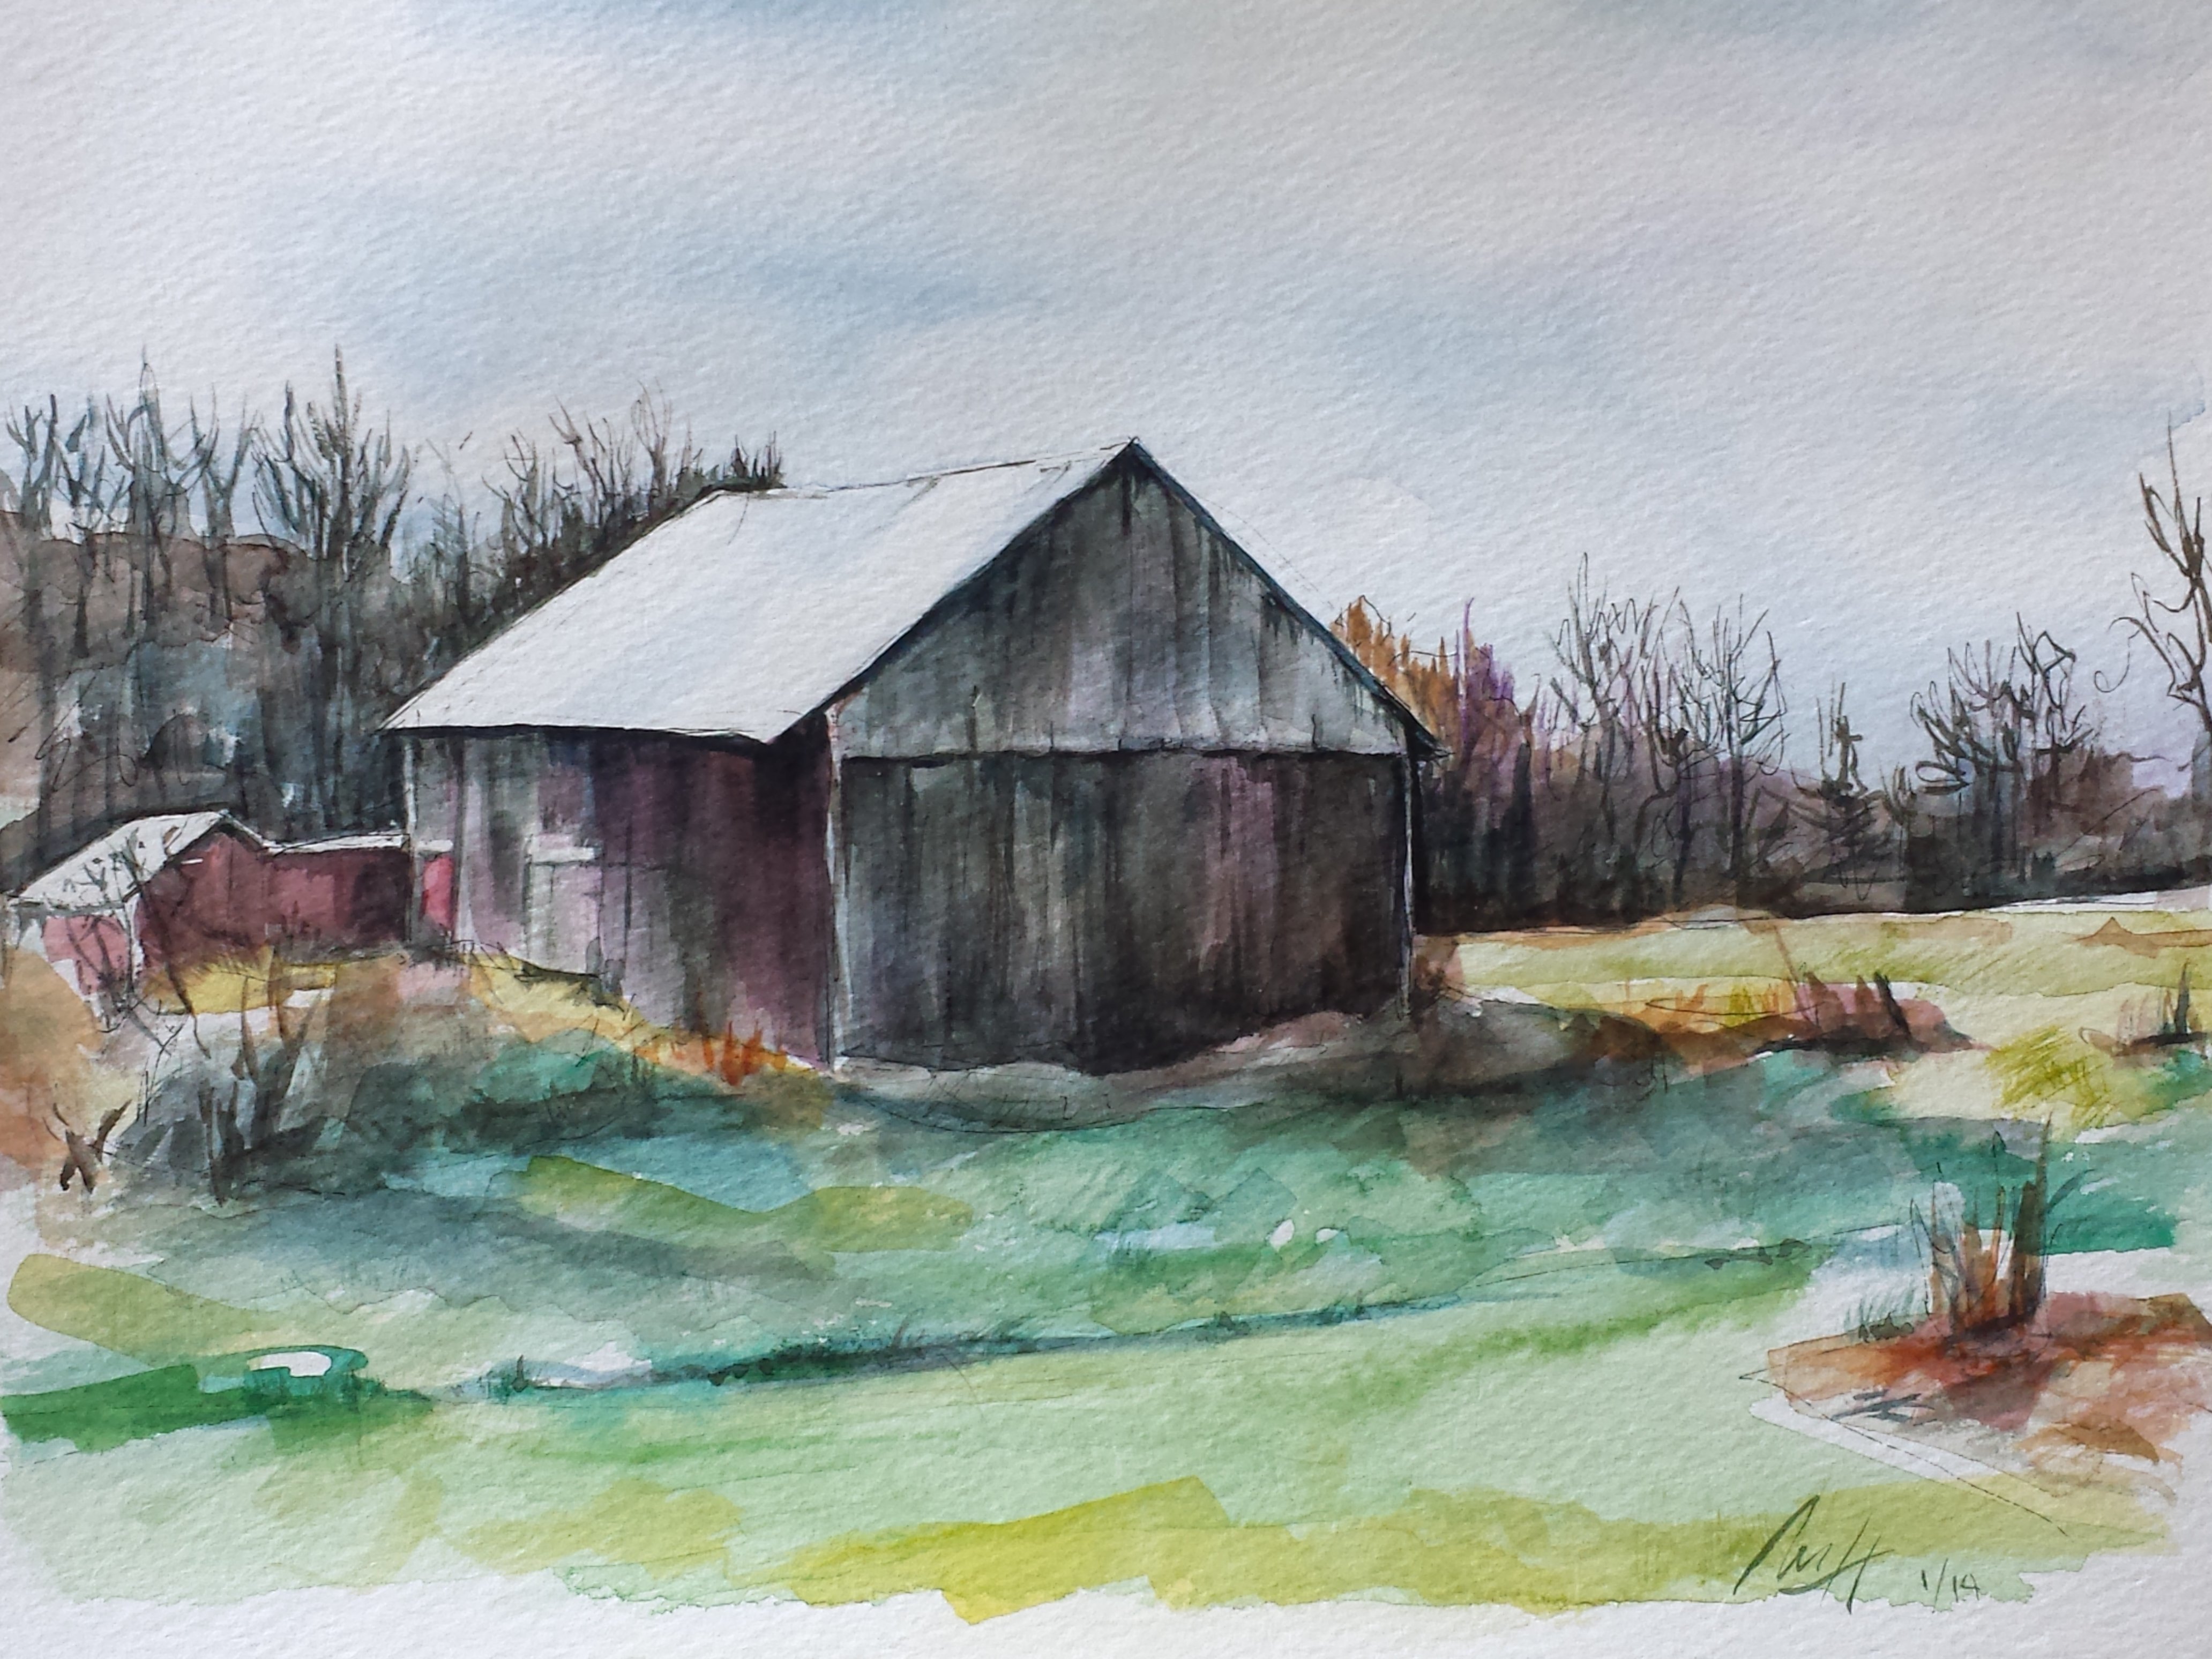 Merrilyne Hendrickson; Lebaron Family Barn, 2015, Original Watercolor, 12 x 9 inches. Artwork description: 241 An old barn belonging to high school friend s family is fondly nestled in the peaceful Cambridge Valley.  So many colors in old wood only watercolor can capture...